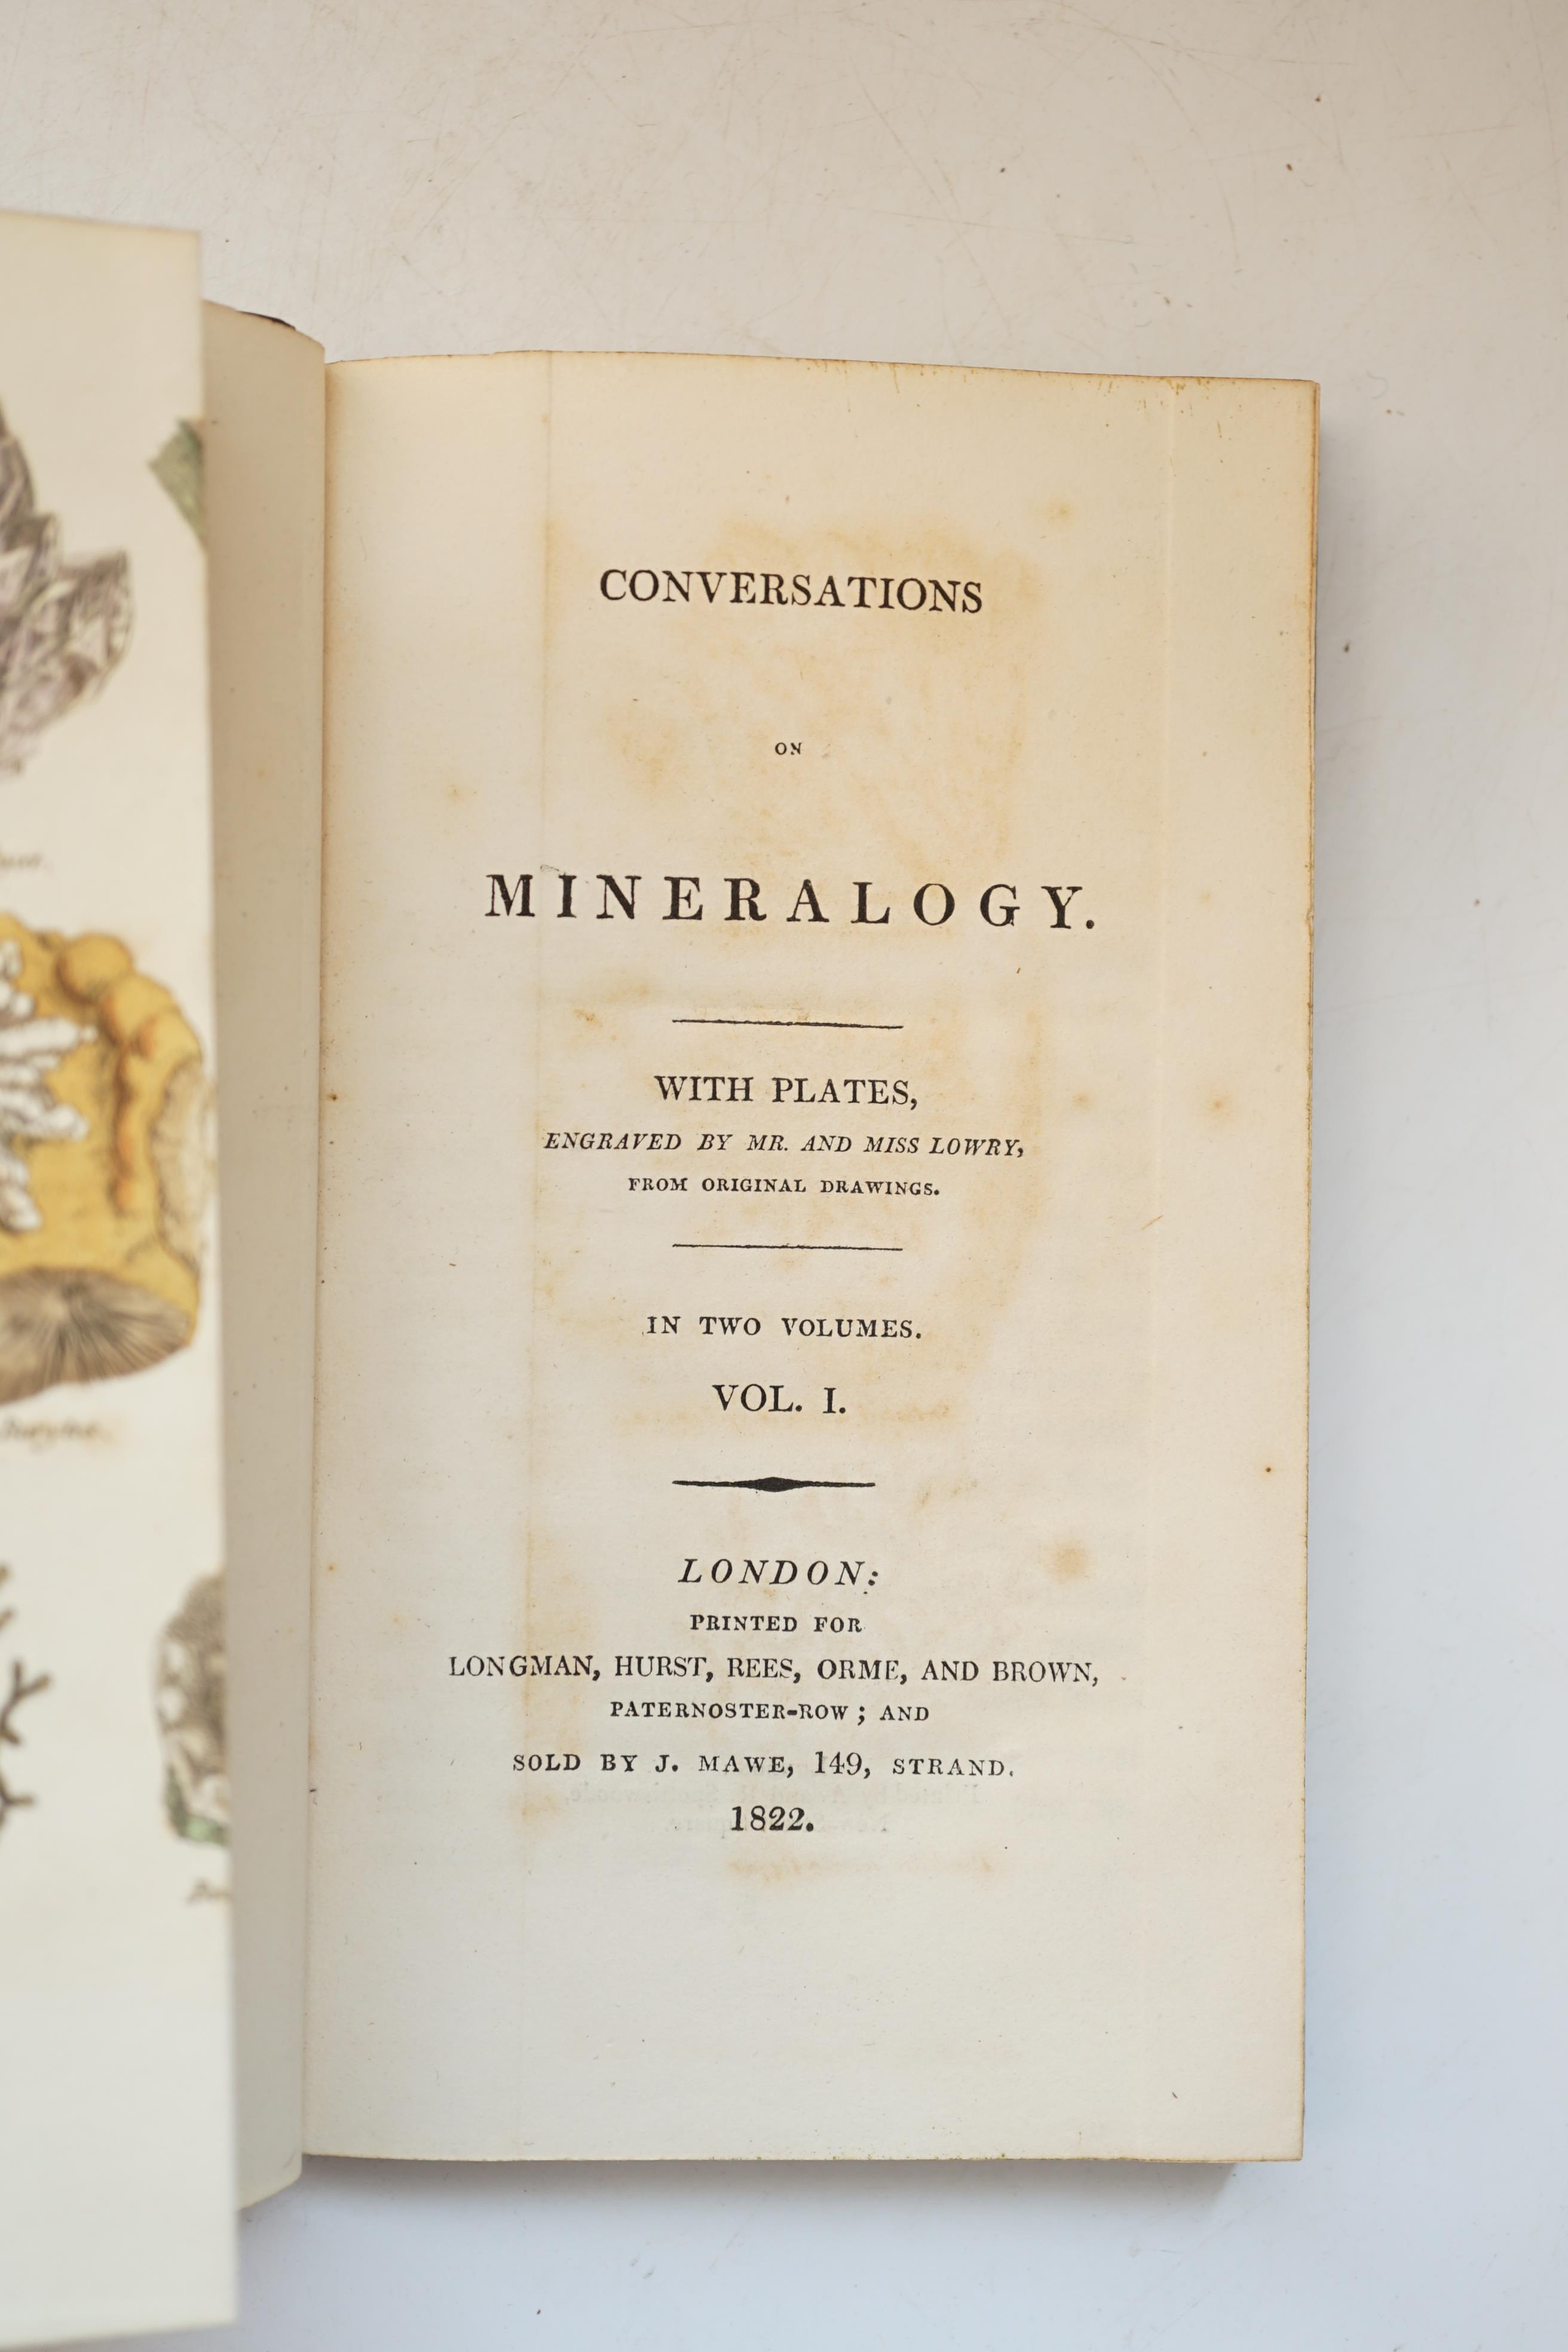 [Lowry, Delvalle)] - Conversations on Mineralogy, 1st edition, 2 vols. 12mo, half green morocco, hand coloured double-page frontispiece and 11 folding plates, vol. I lacks advertisement at beginning, Longman, Hurst, Rees